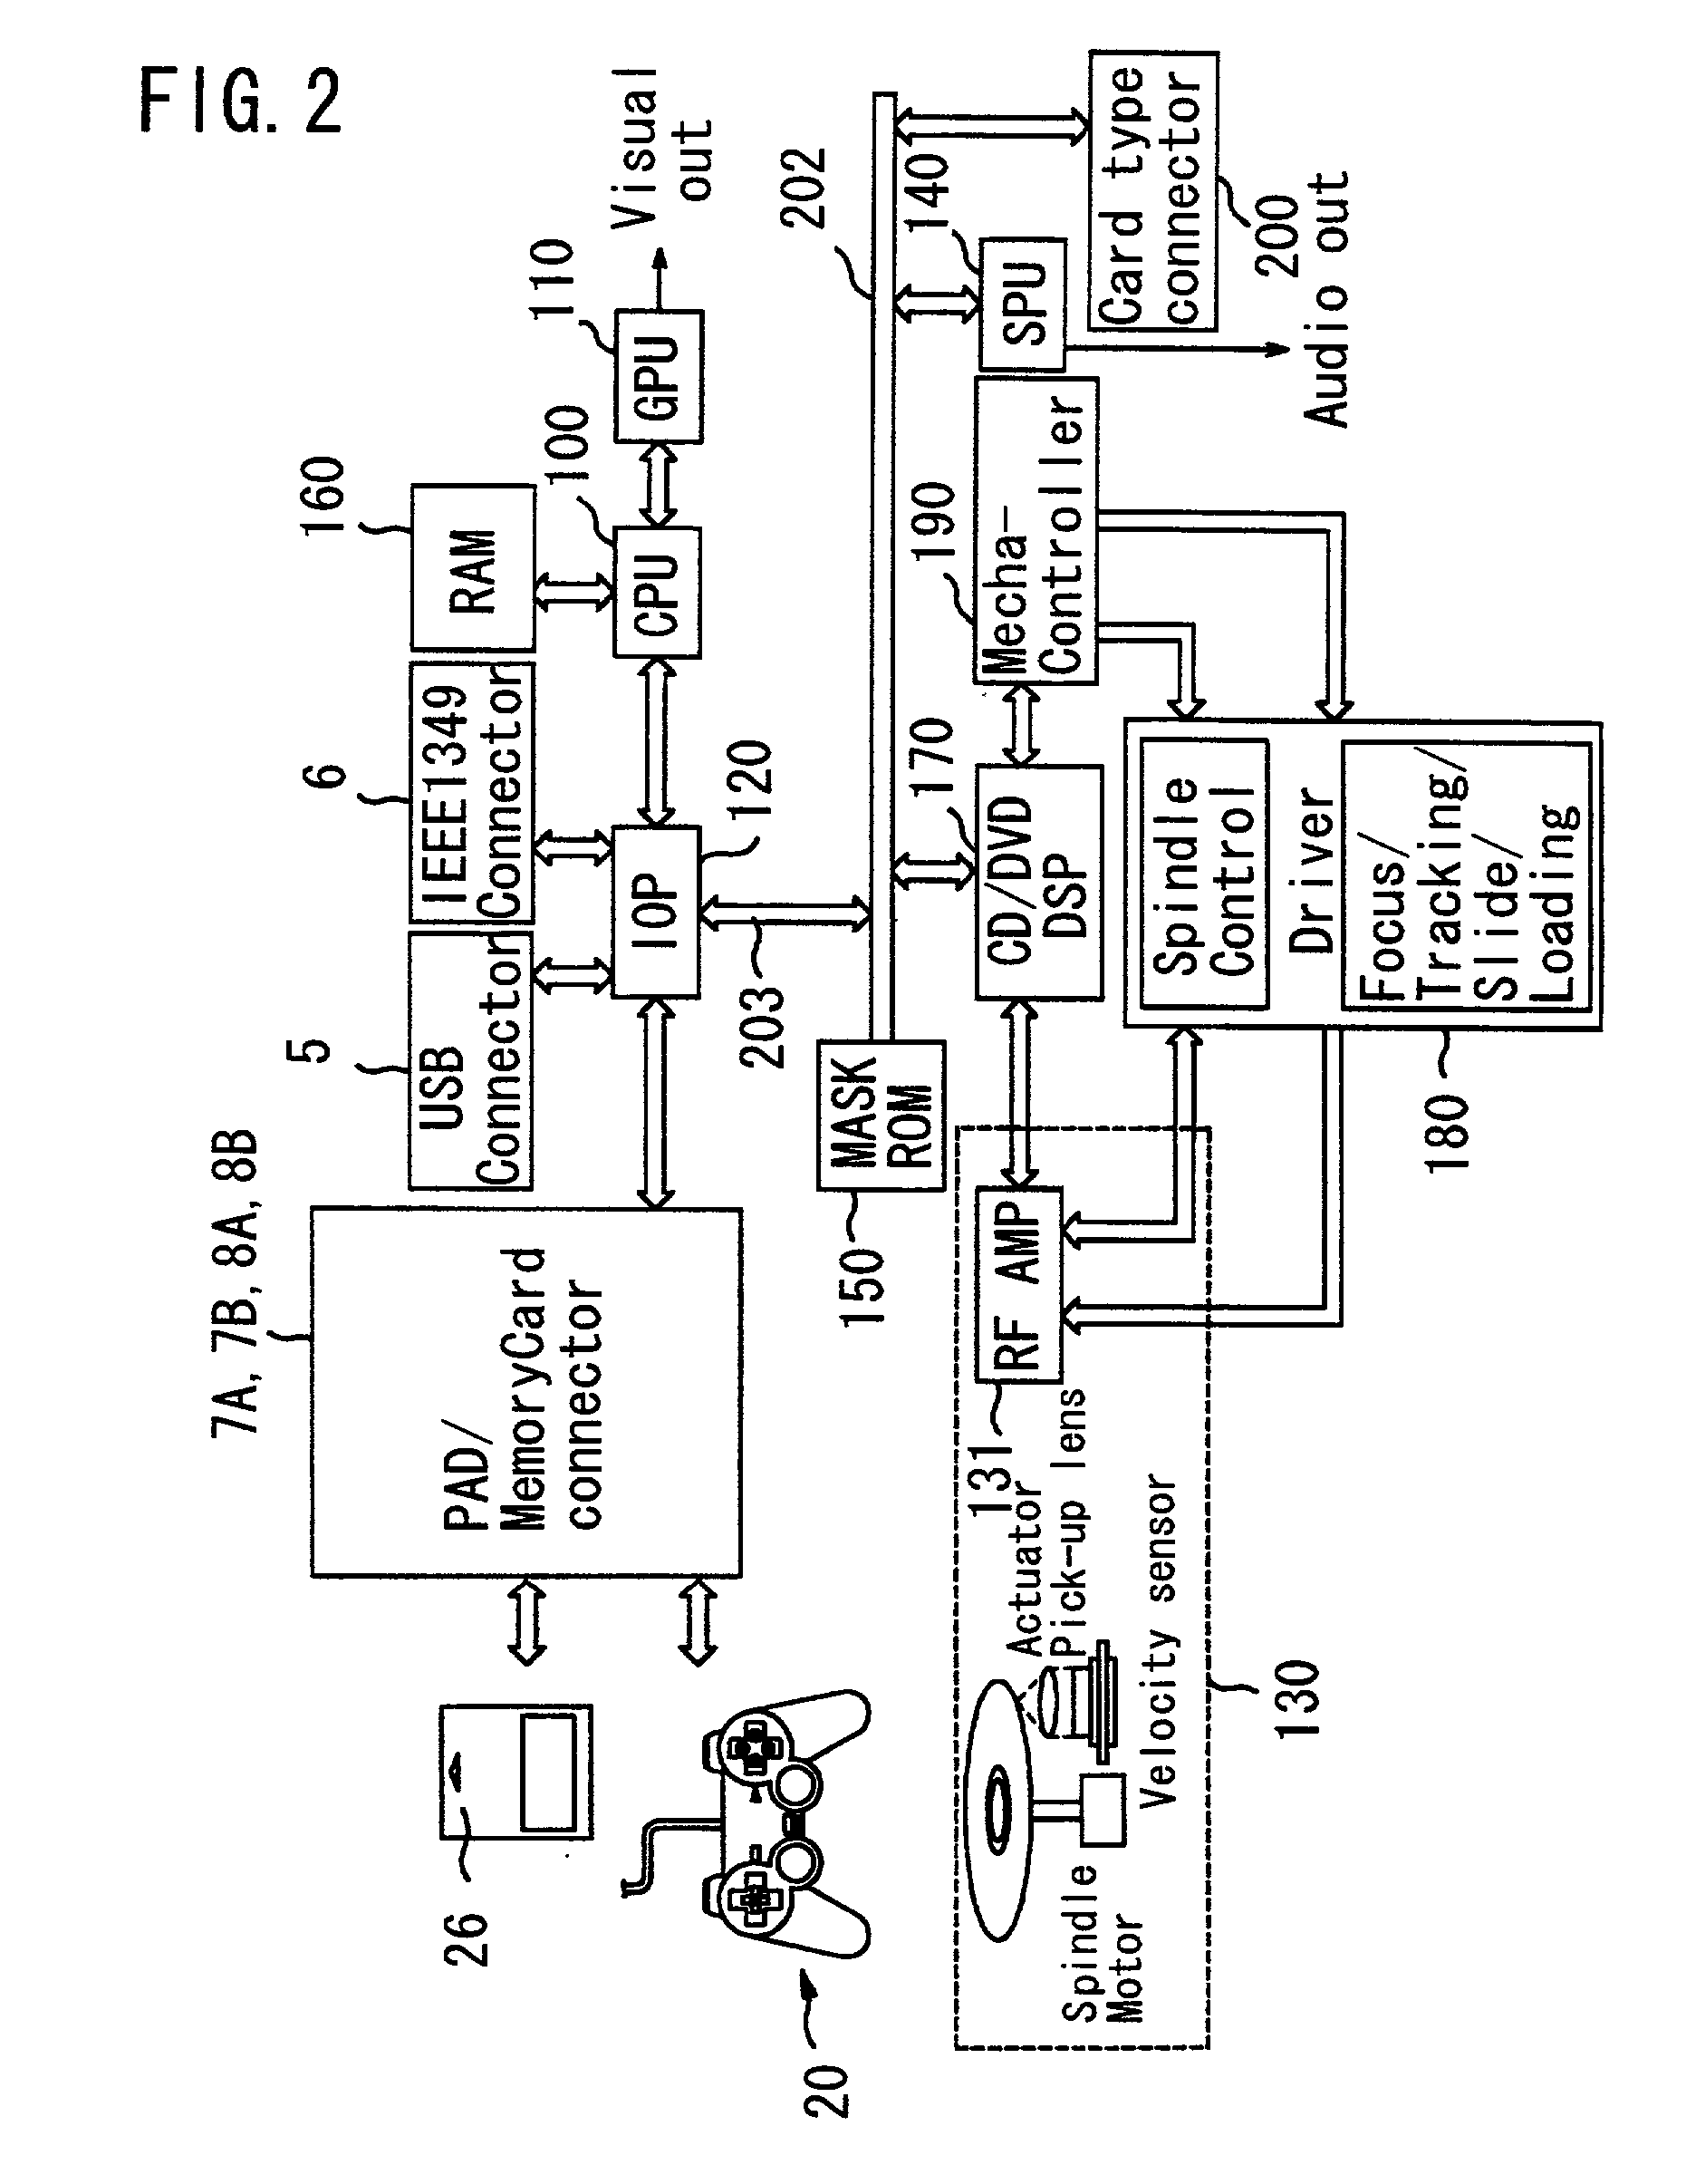 Method related to object control of video game